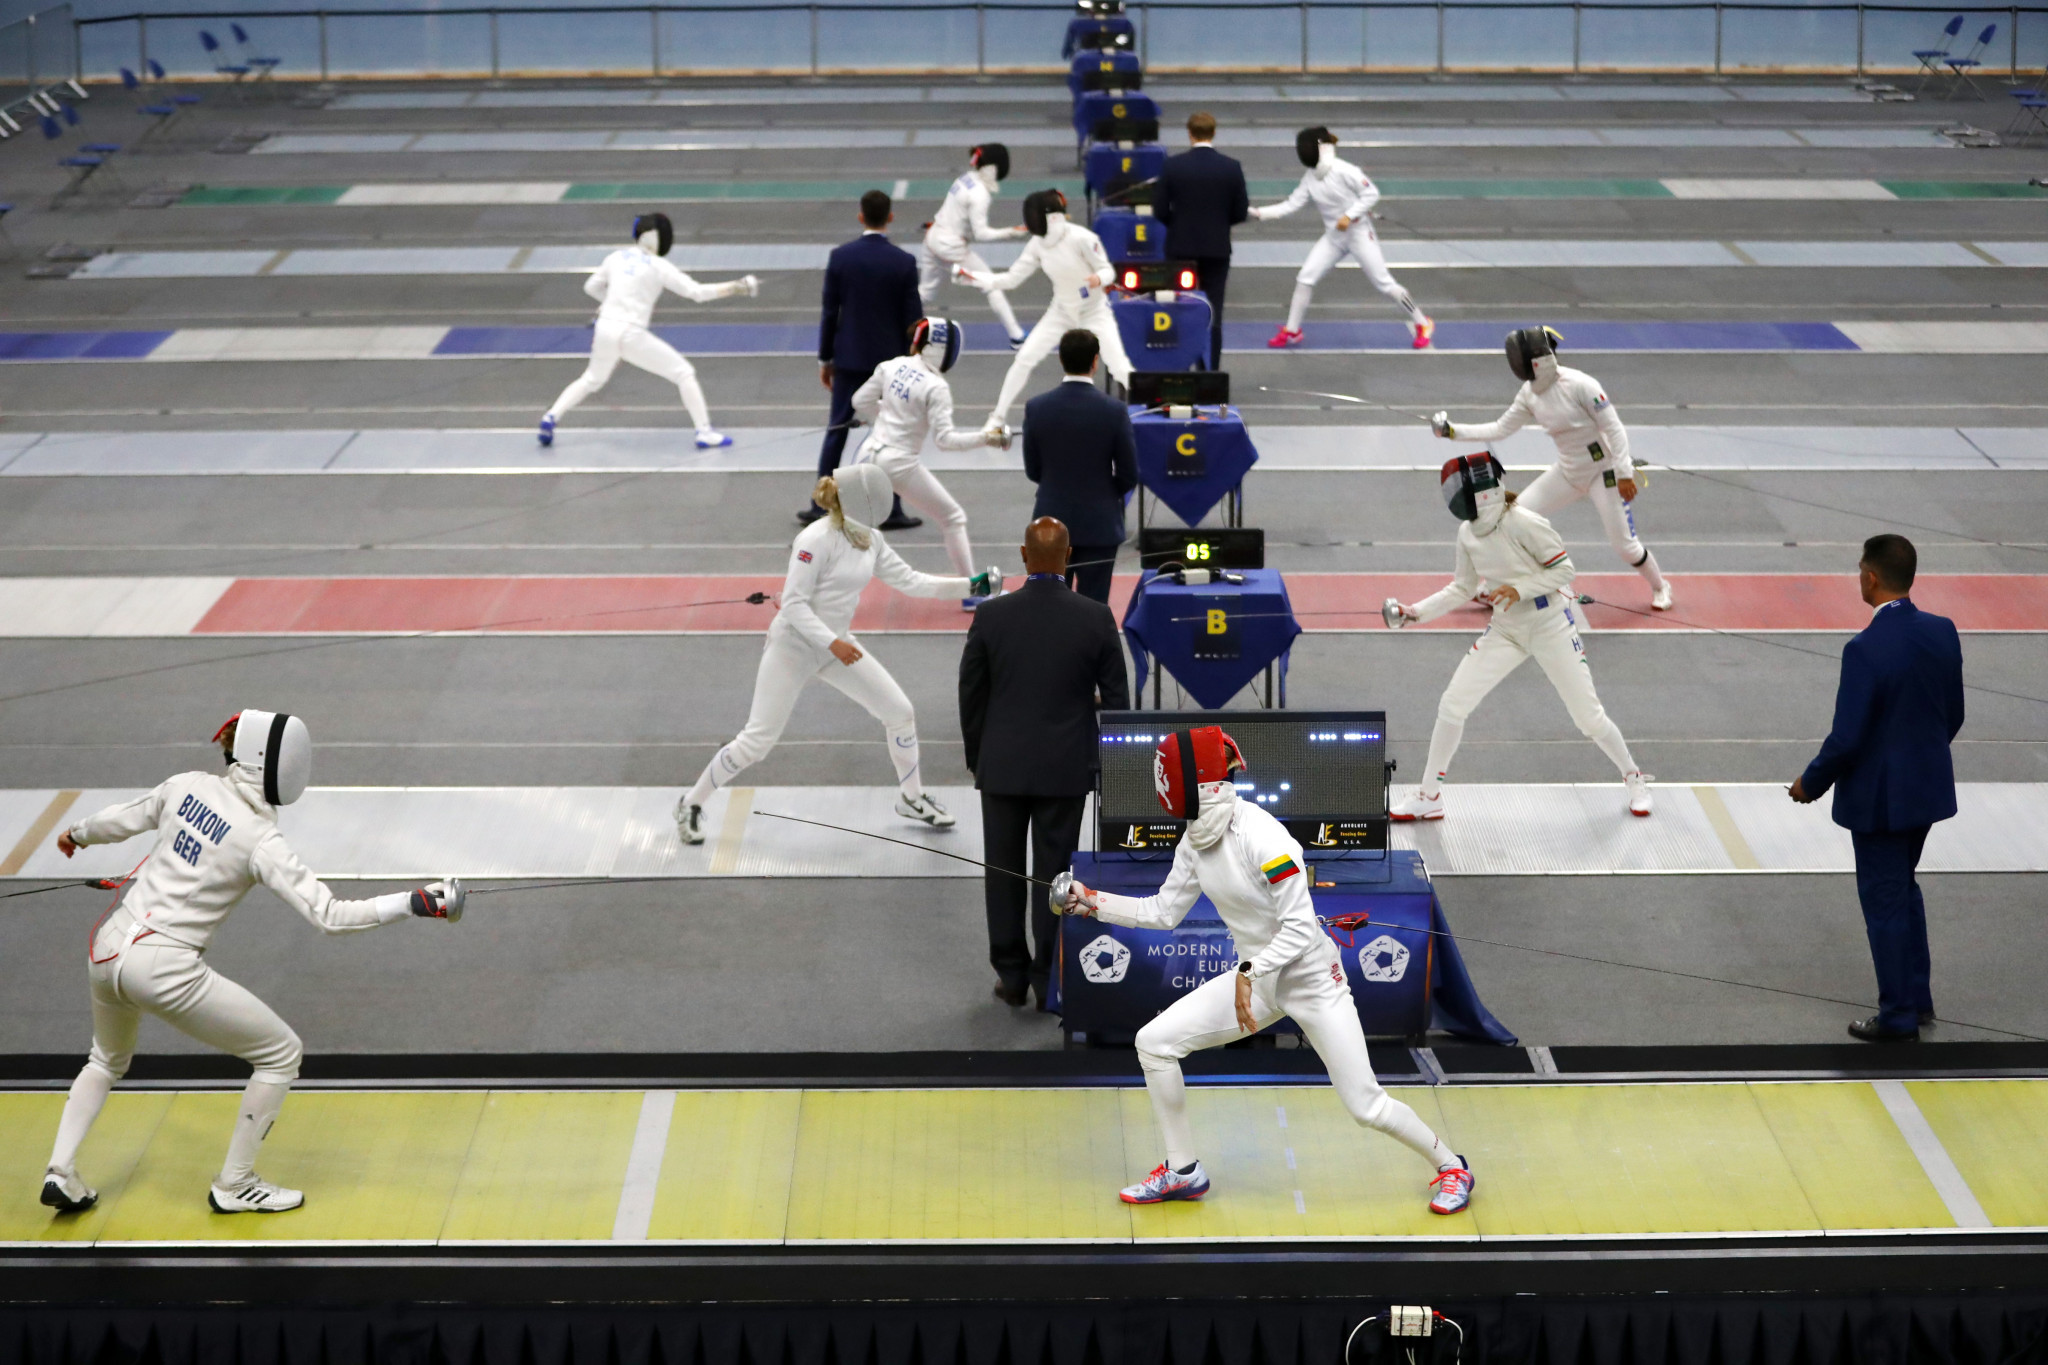 Guidelines have been produced for all of the modern pentathlon disciplines ©Getty Images